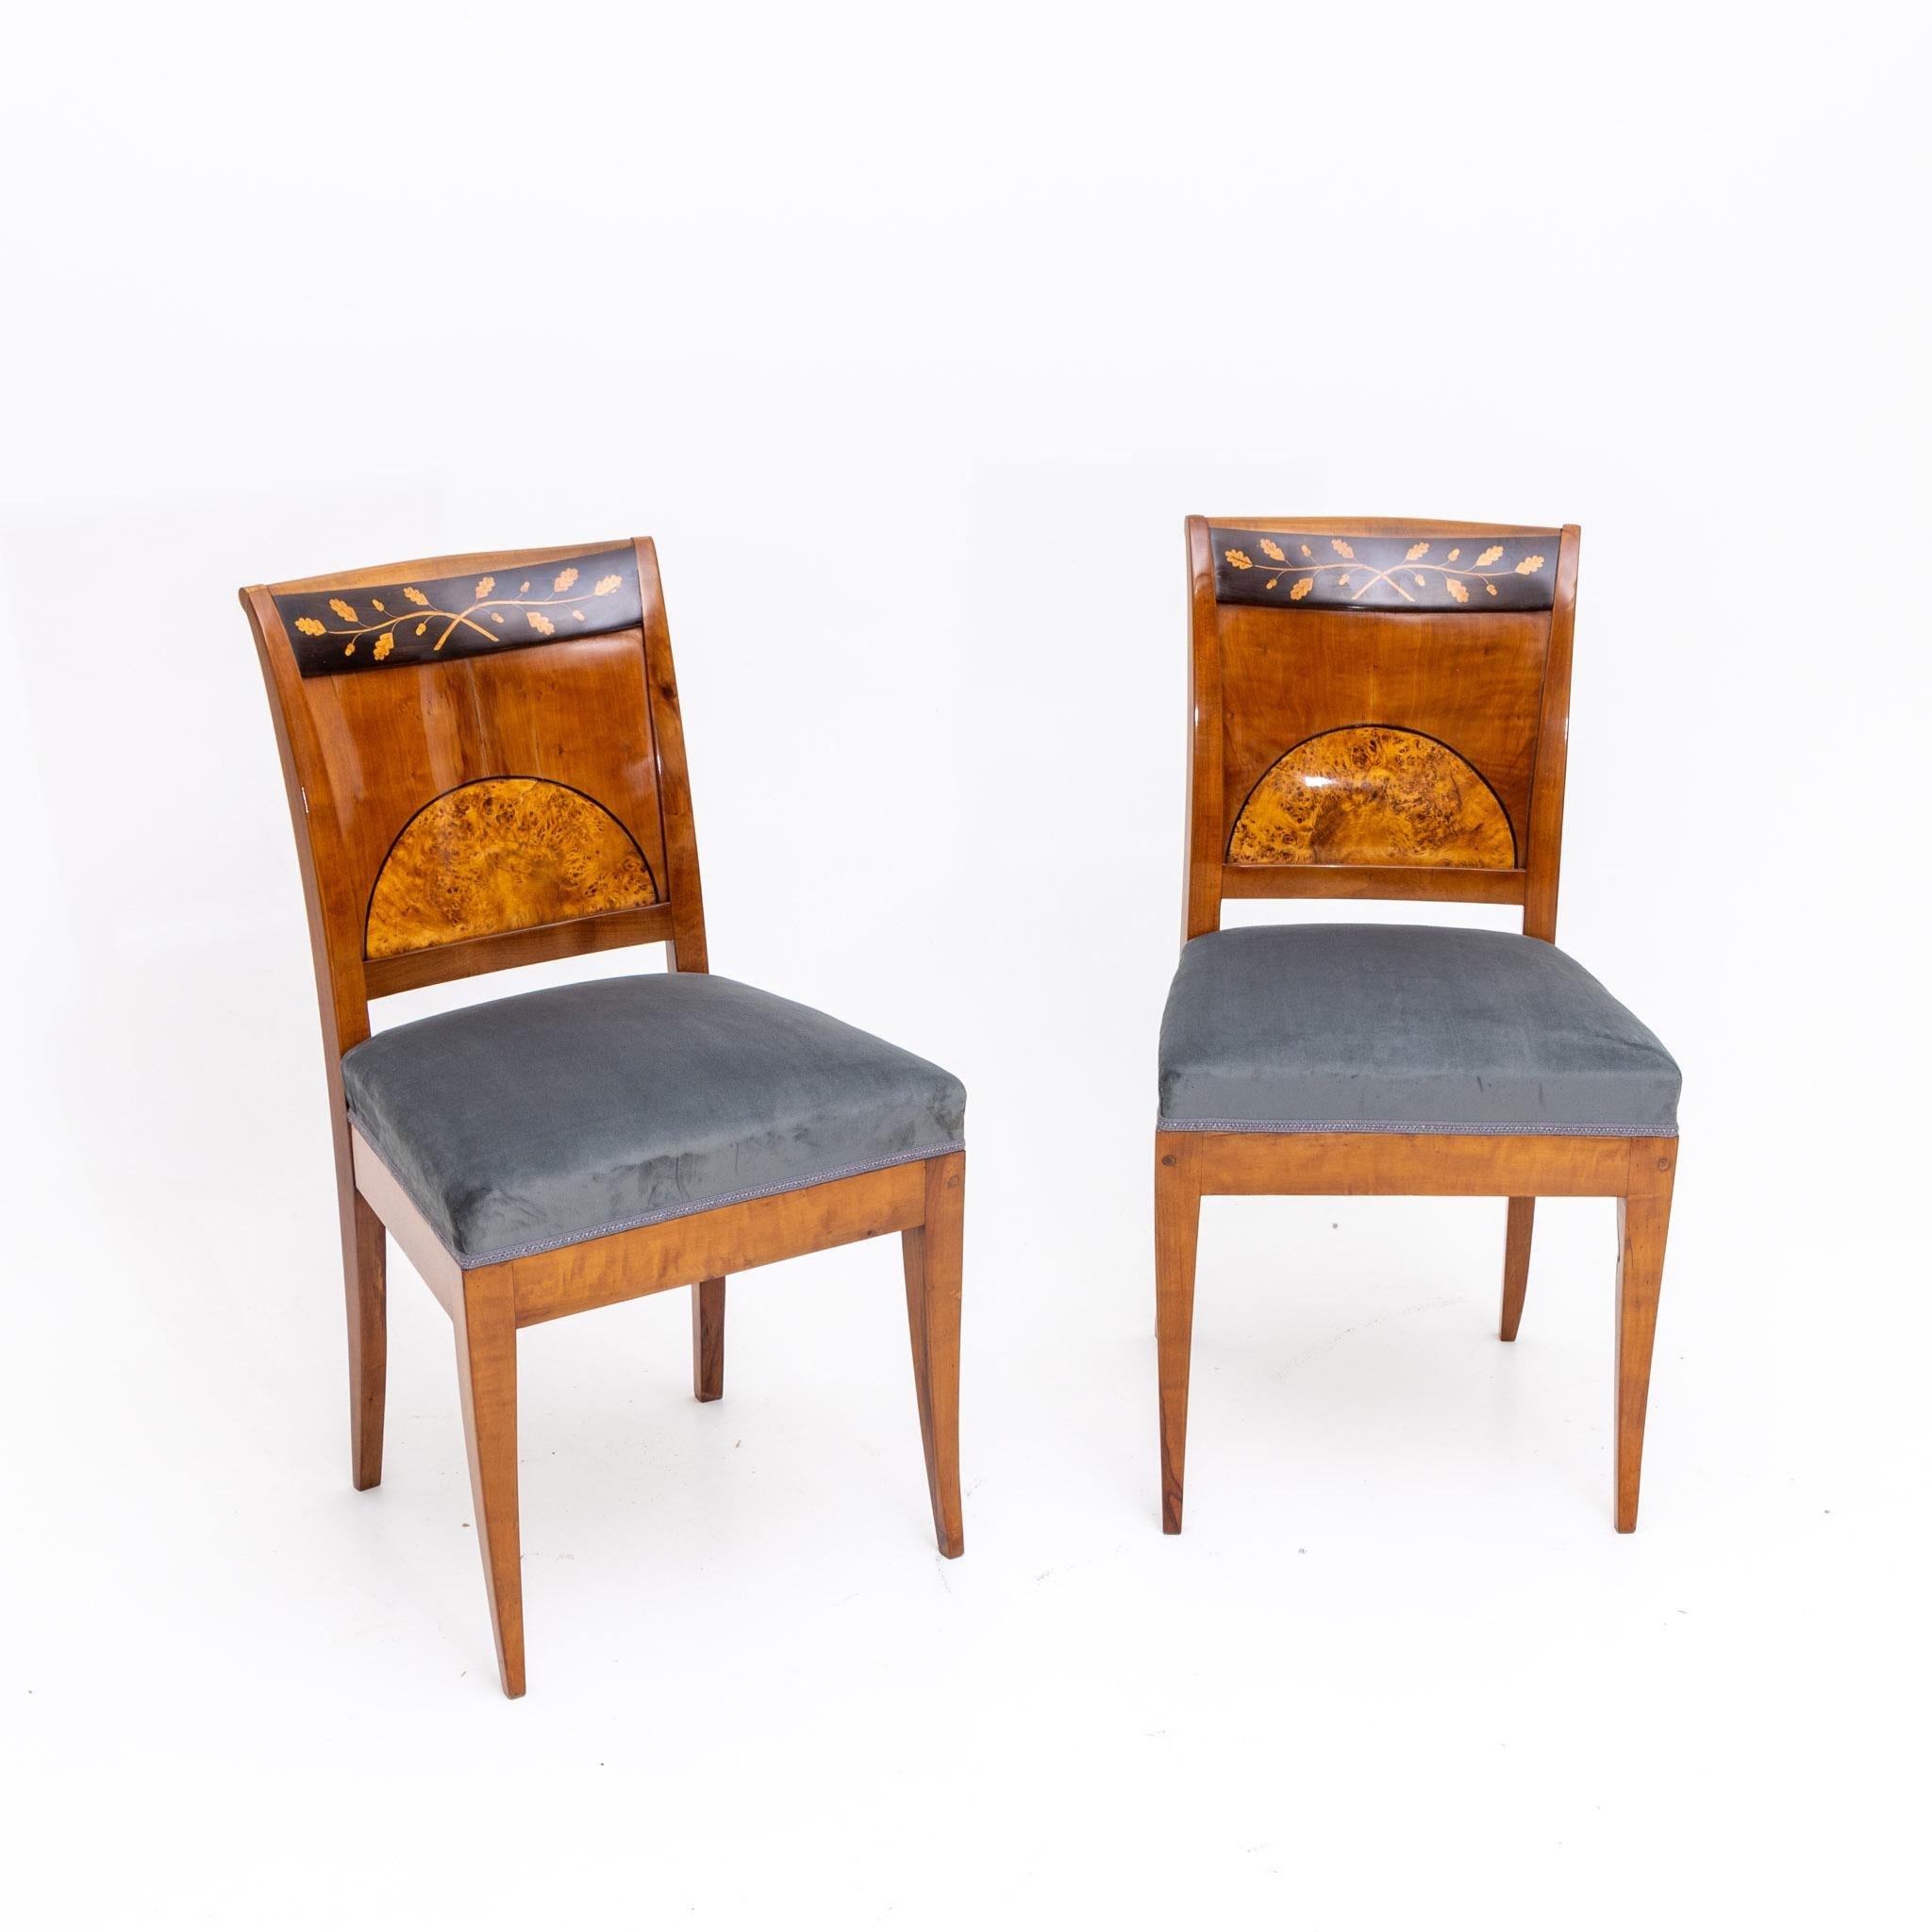 Pair of Biedermeier chairs on flared saber legs and trapezoidal backs with inlay work in the form of a segmental birch burl inlay and oak leaf decoration. The chairs have been reupholstered and hand polished.